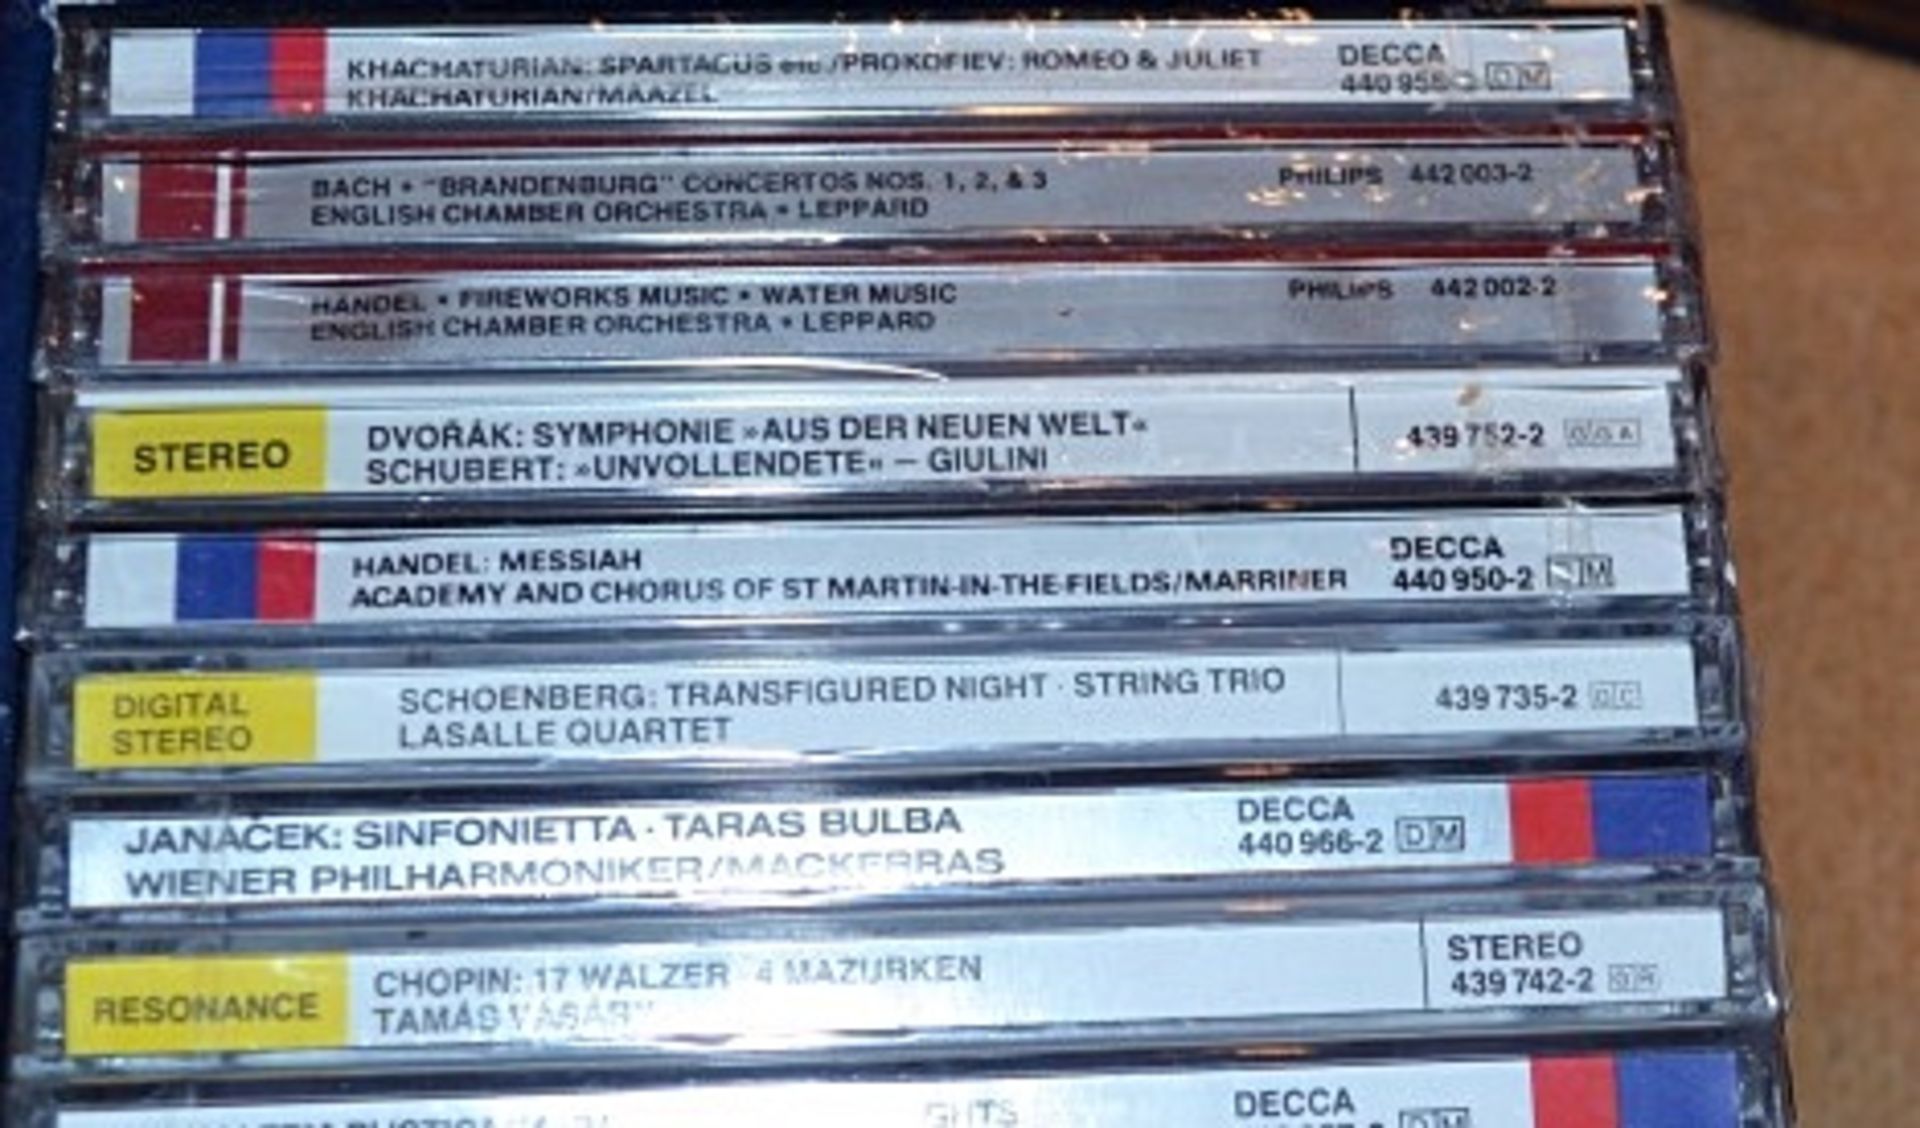 1 x Classical Music 50-CD Boxset - Supplied Over 2 Boxes, As Shown - Preowned, As New, Mostly Sealed - Image 4 of 6